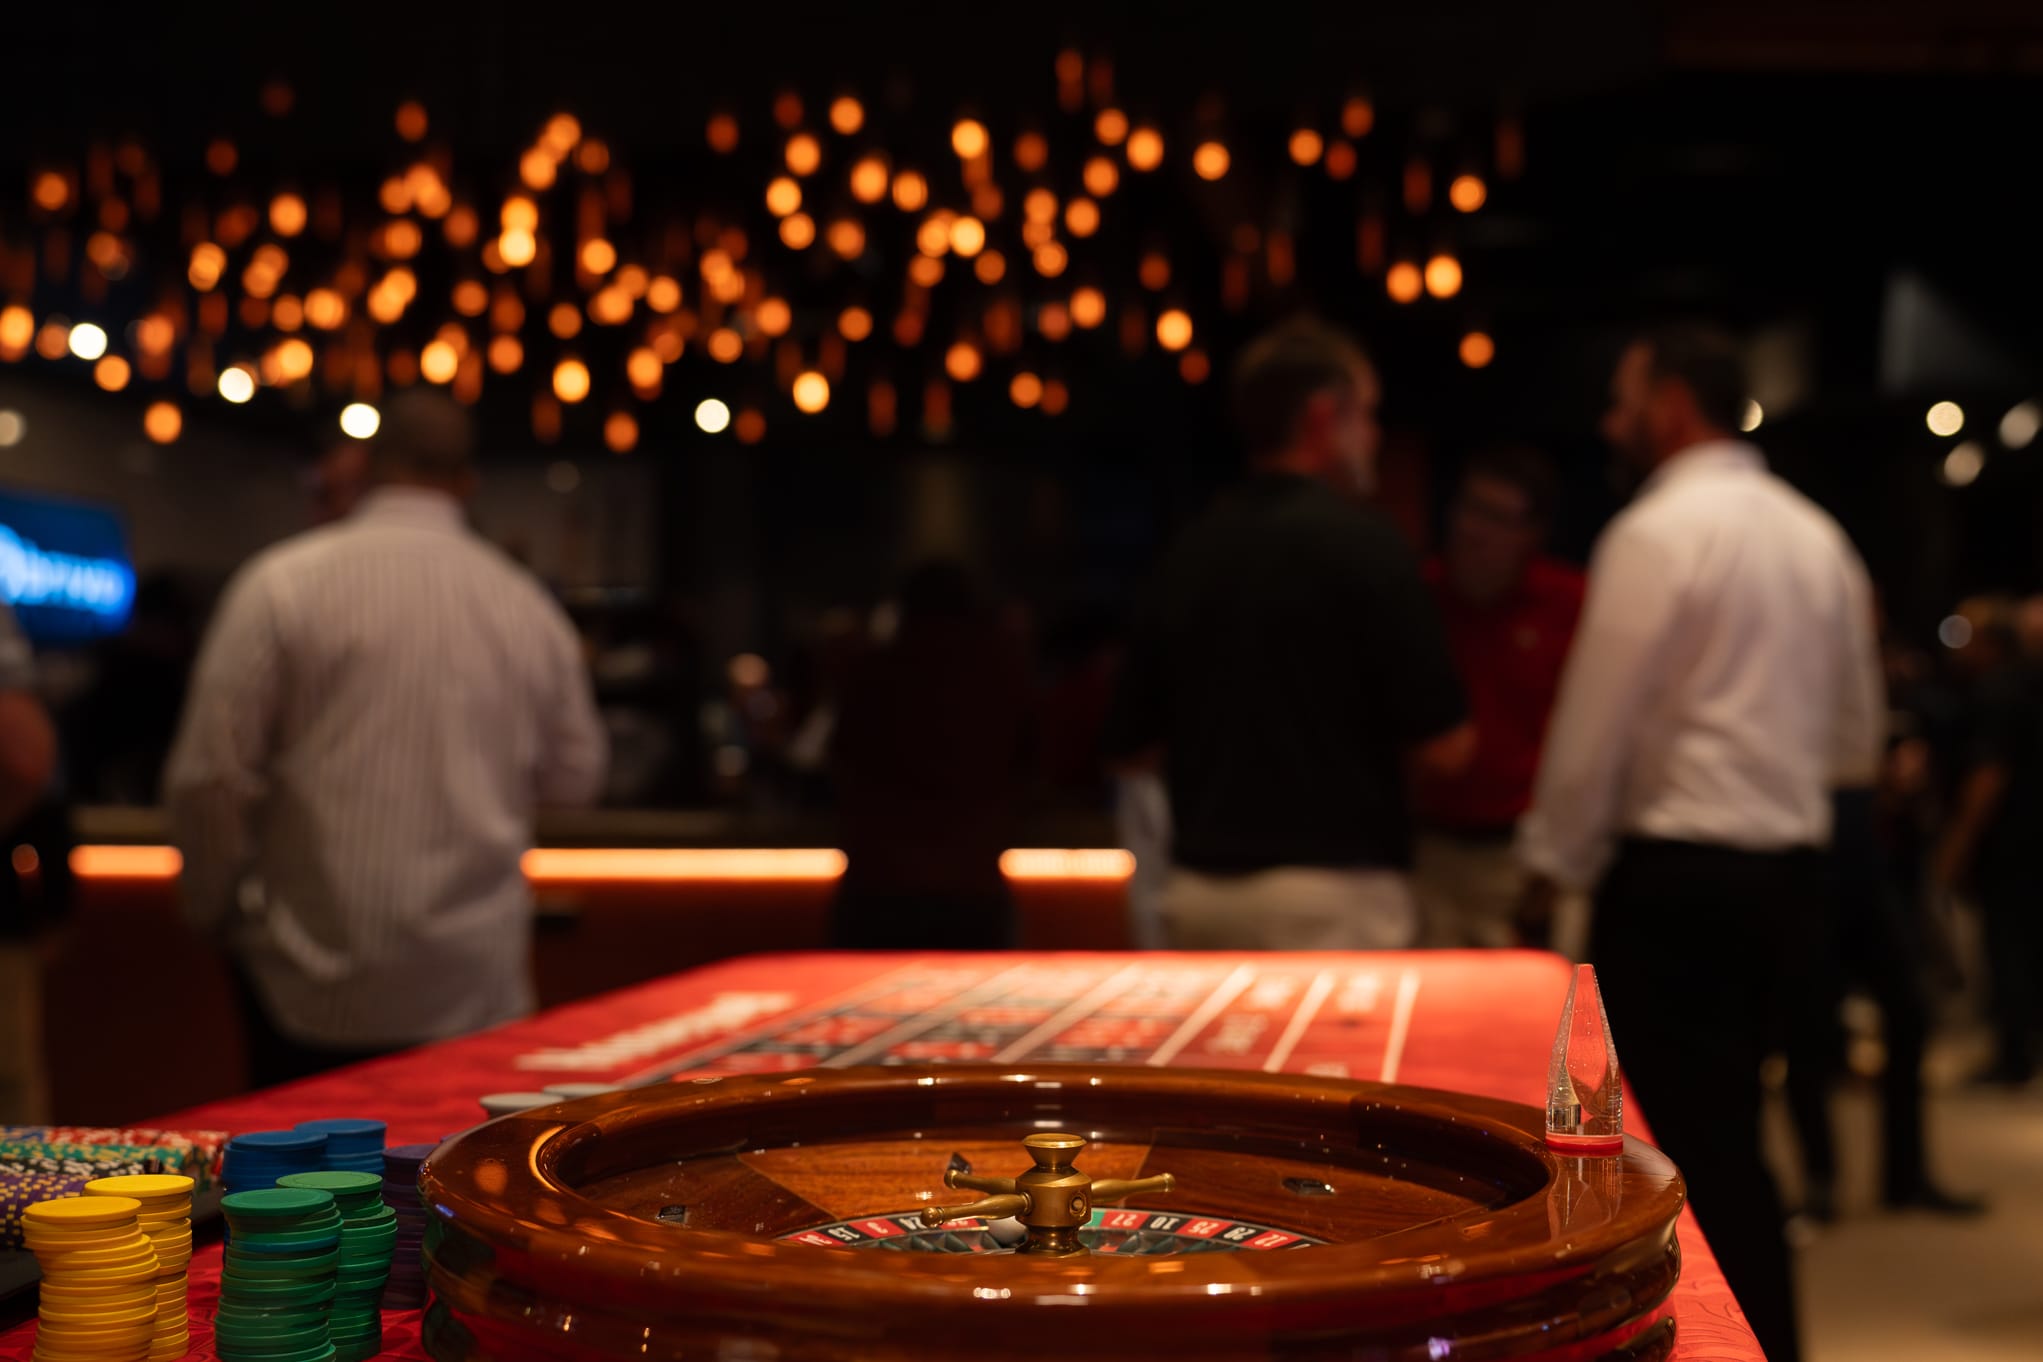 Elite Casino Events set up games for Security 101 Appreciation Event at Happiest Hour in Dallas, TX